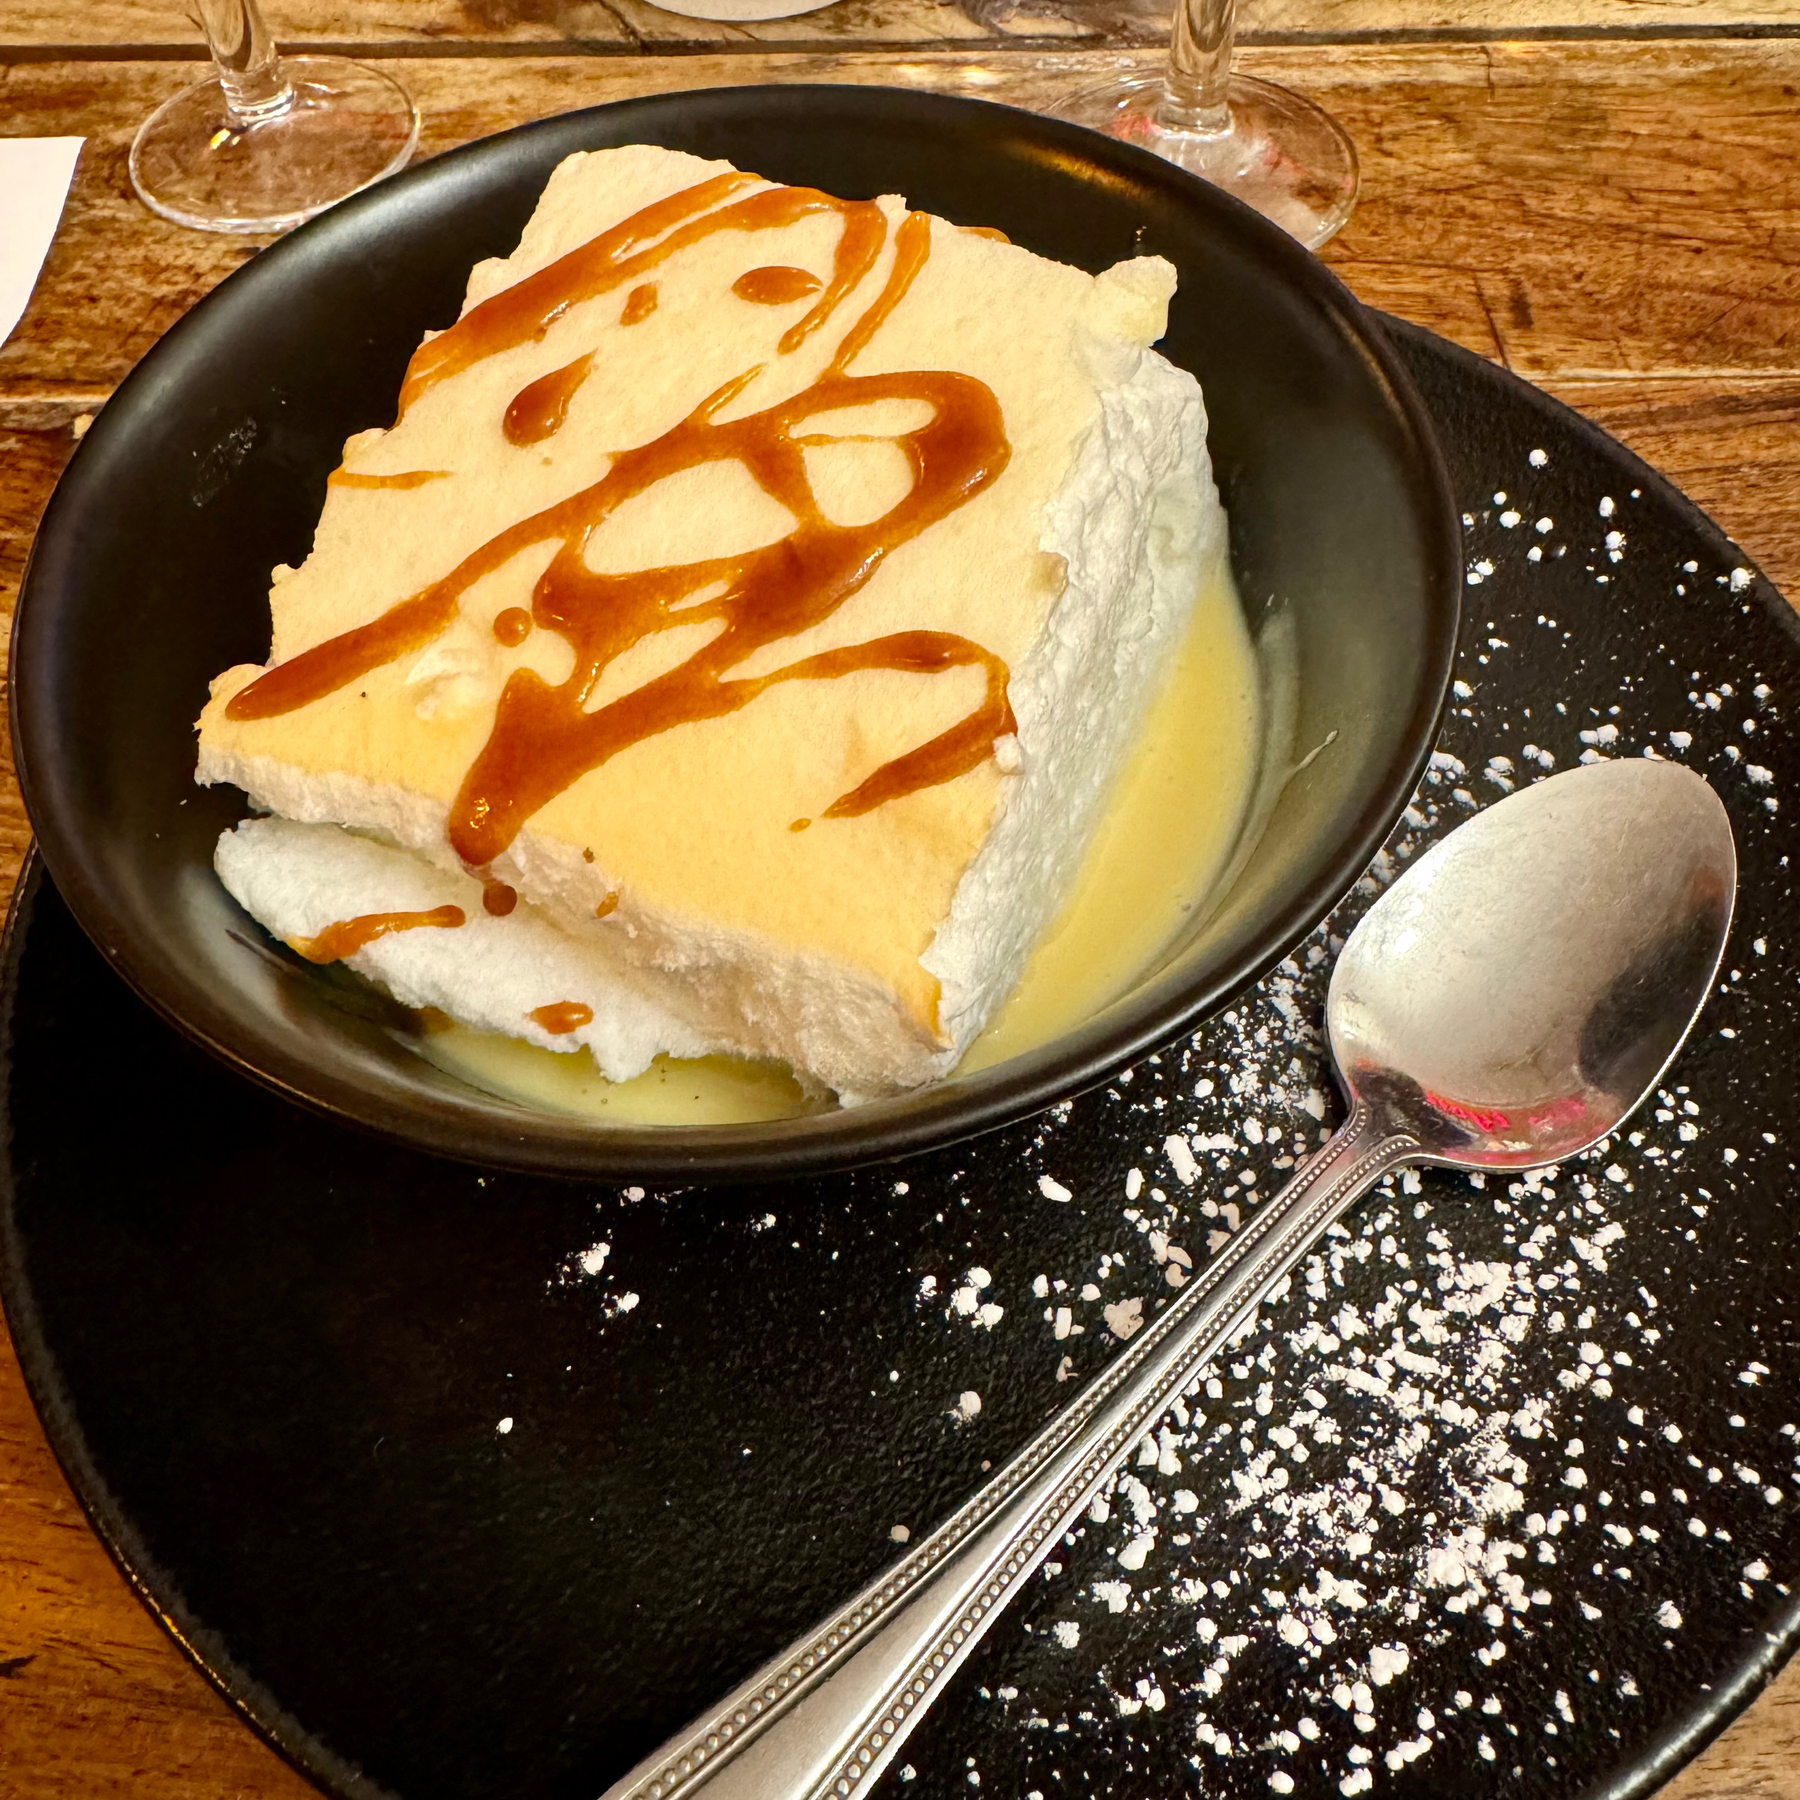 A slice of meringue in a pool of custard with caramel sauce and powdered sugar on a black plate with a spoon, on a wooden table.